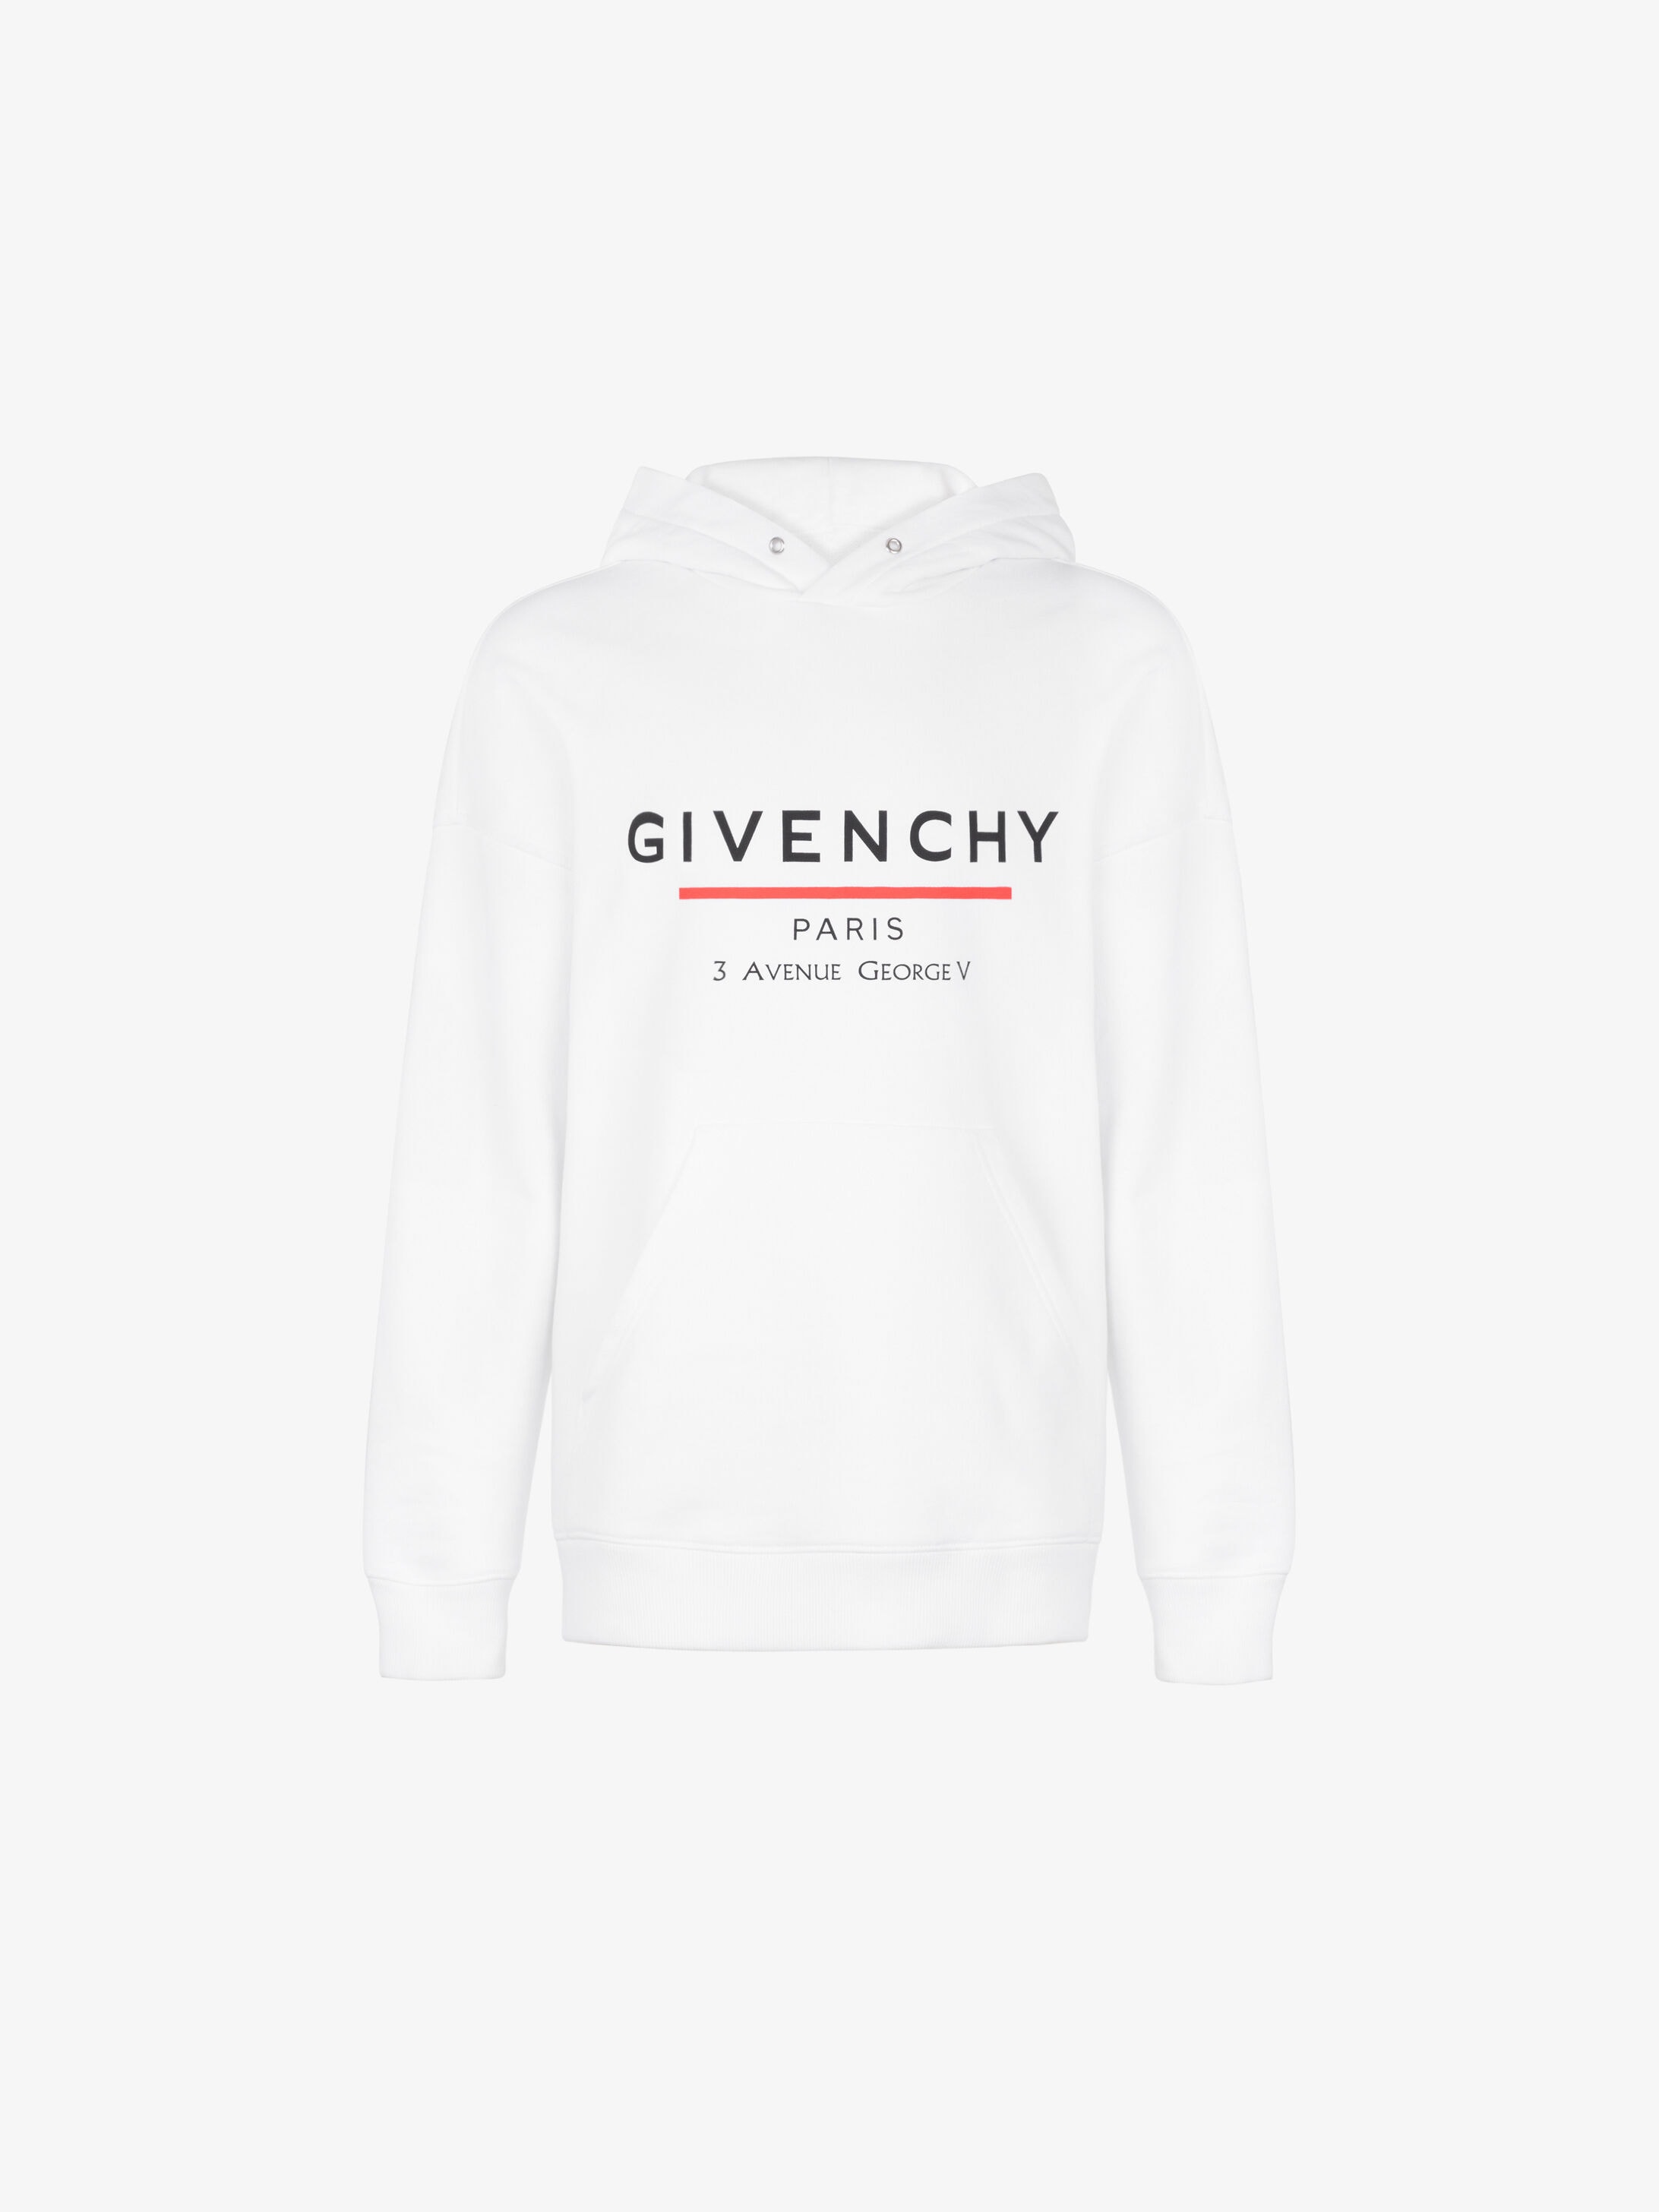 givenchy grey hoodie